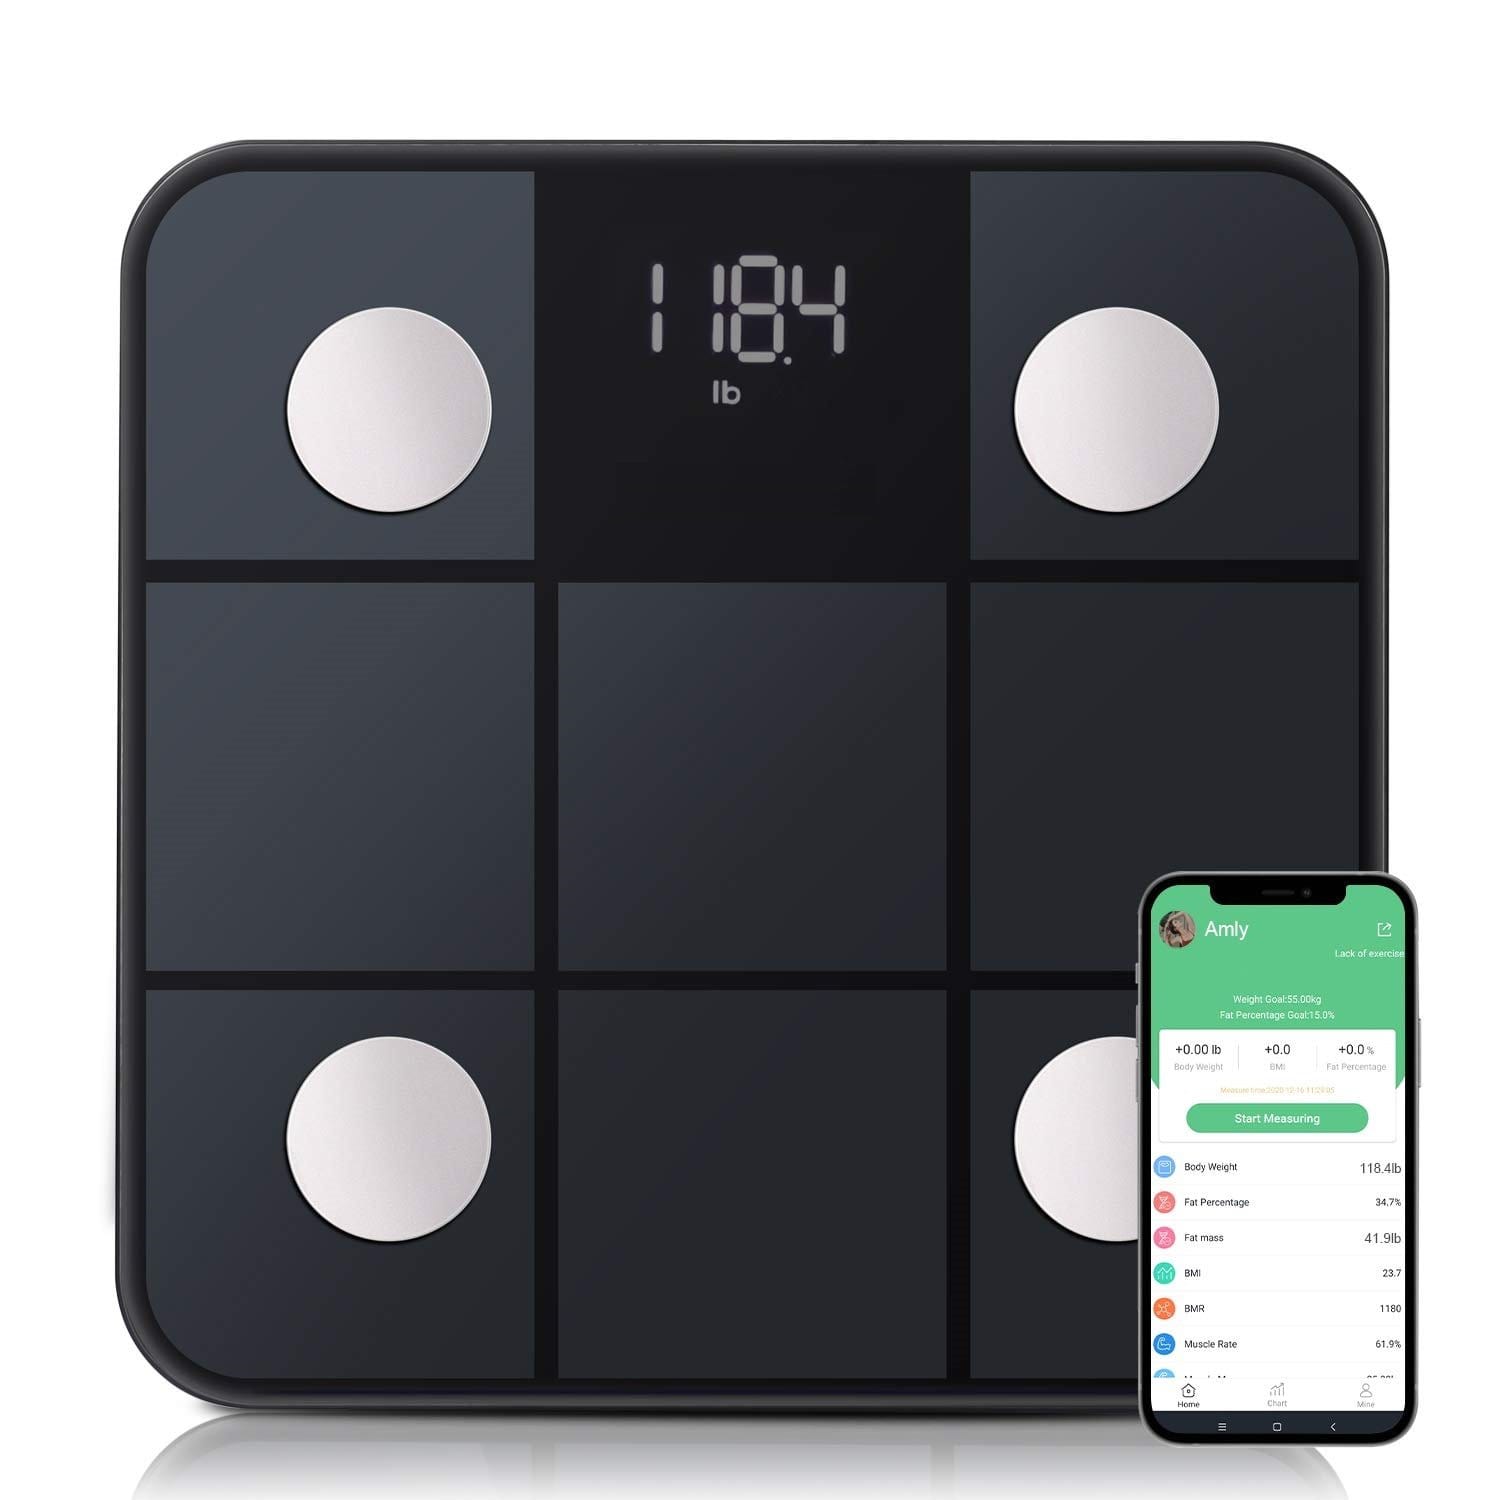 T100 Smart Scale works with Apple Health, Google Fit